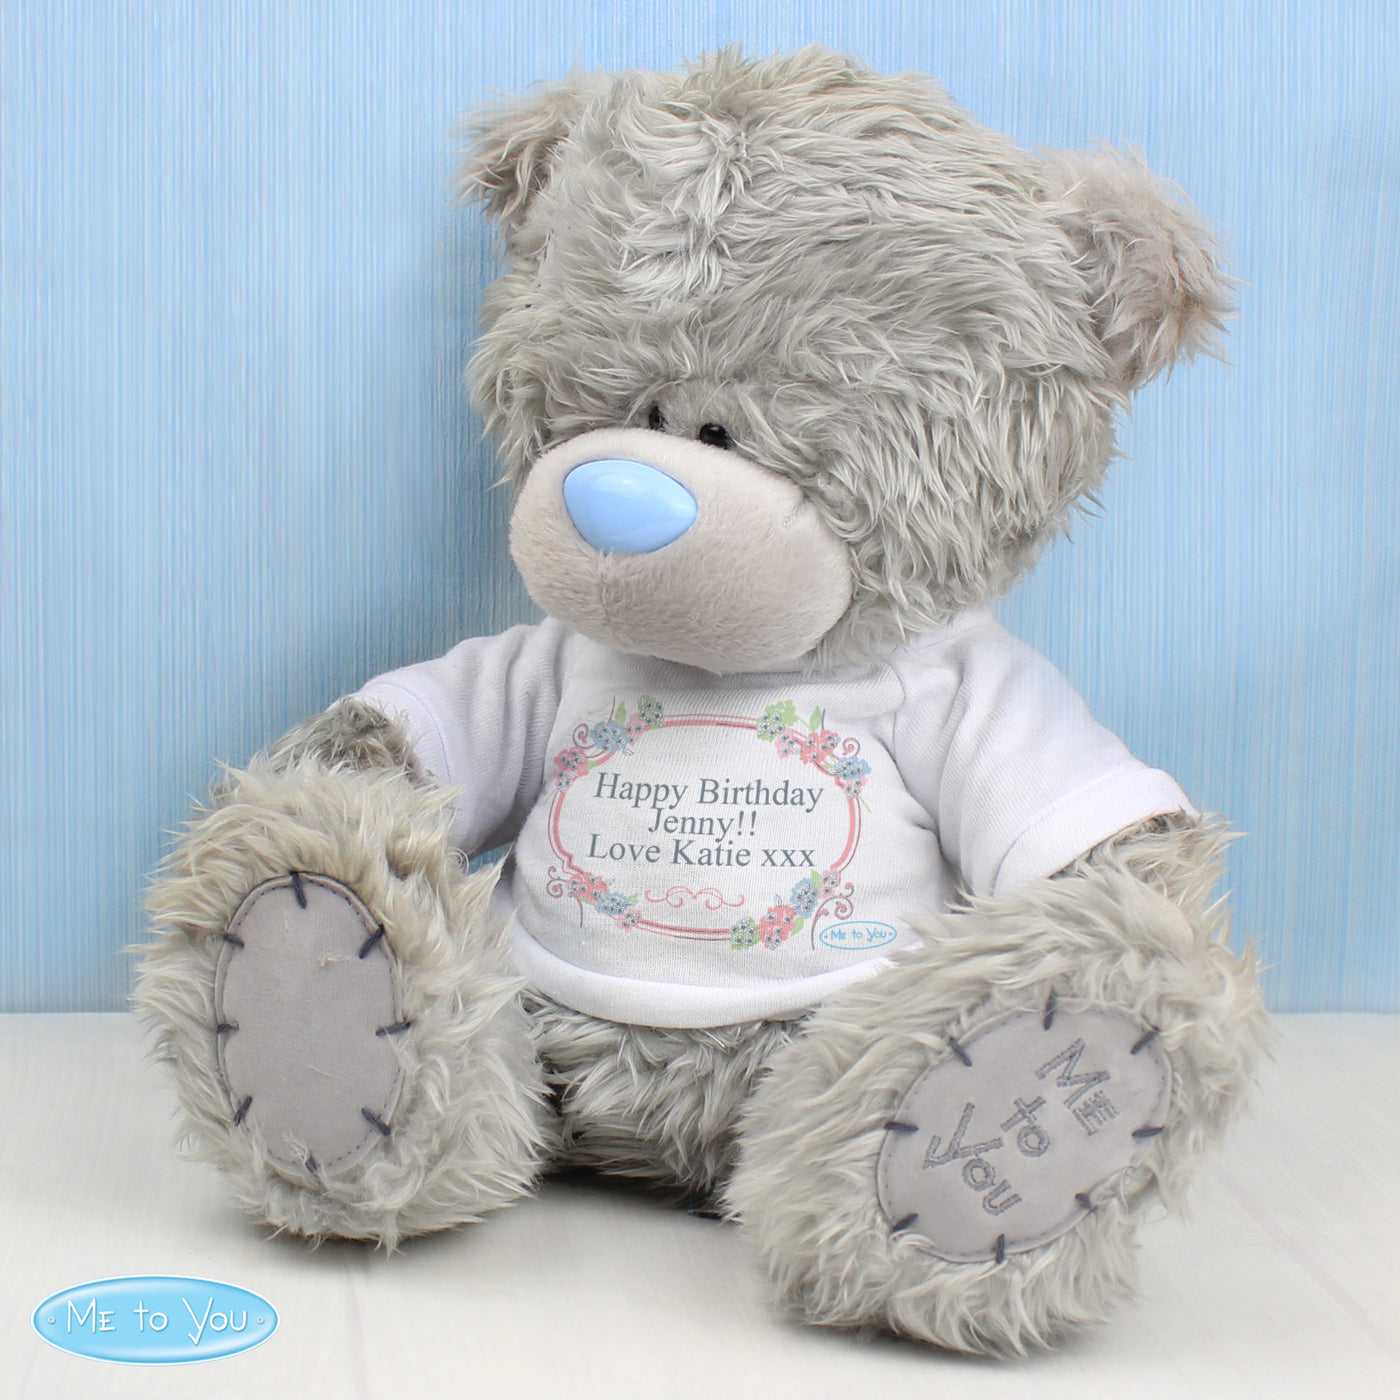 Personalised Me To You Teddy Bear with Floral T-Shirt - Shop Personalised Gifts